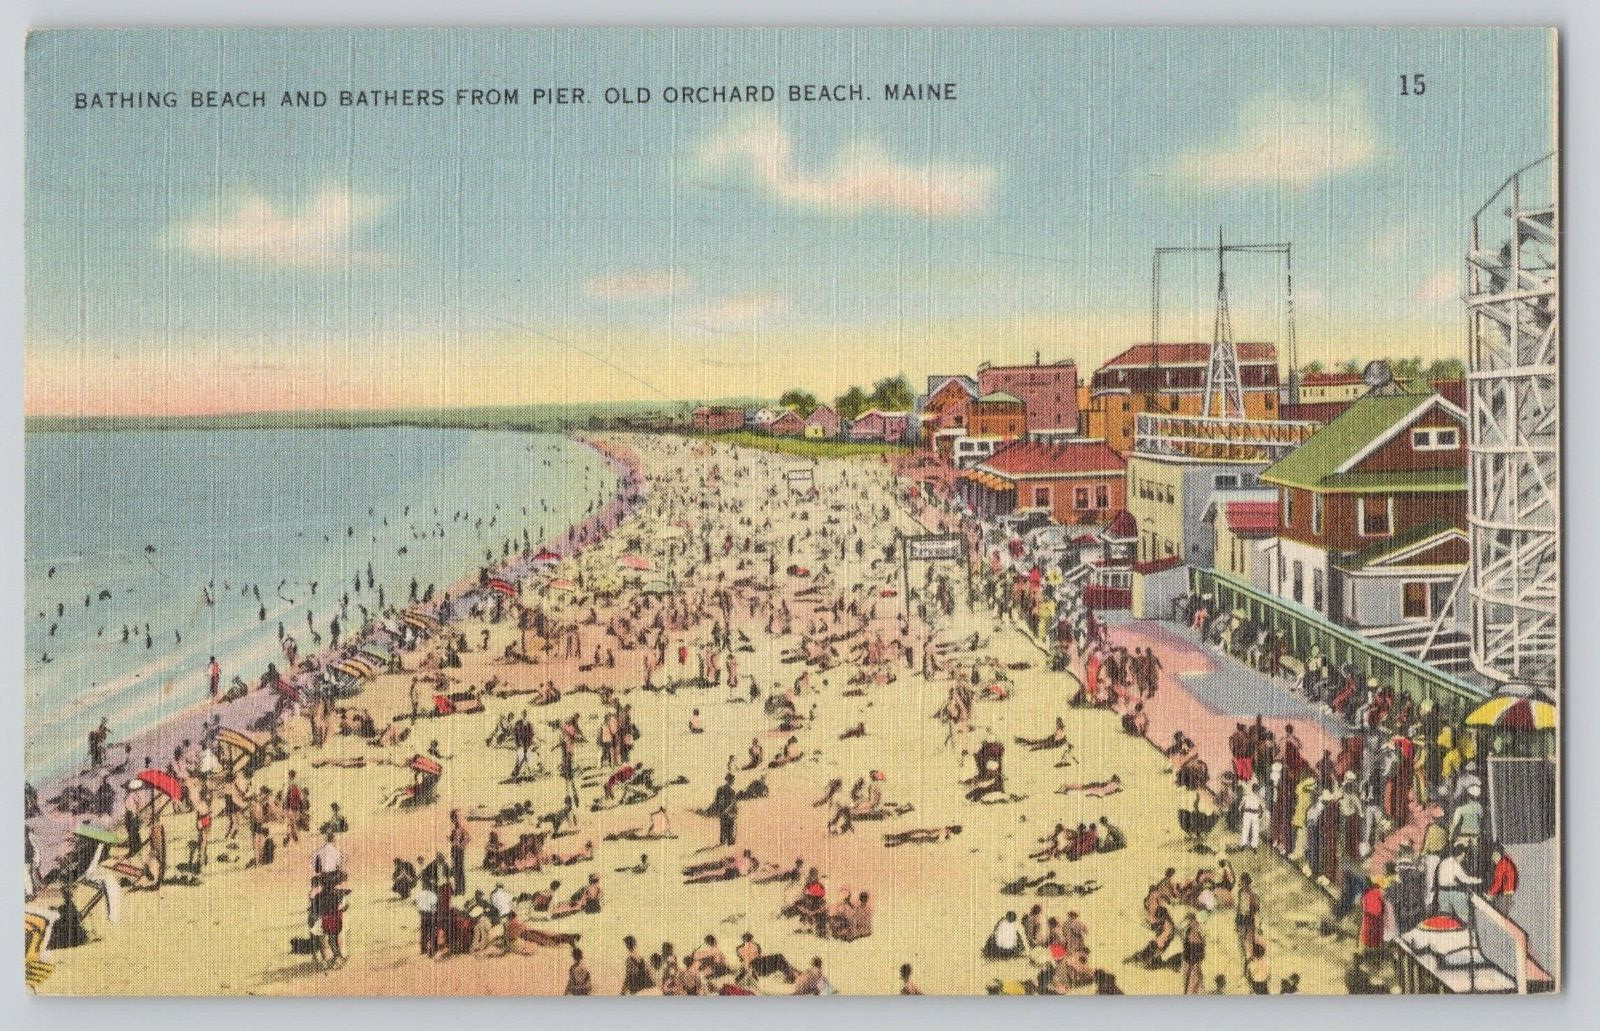 Postcard c1946 Bathing Beach and Bathers From Pier, Old Orchard Beach, Maine